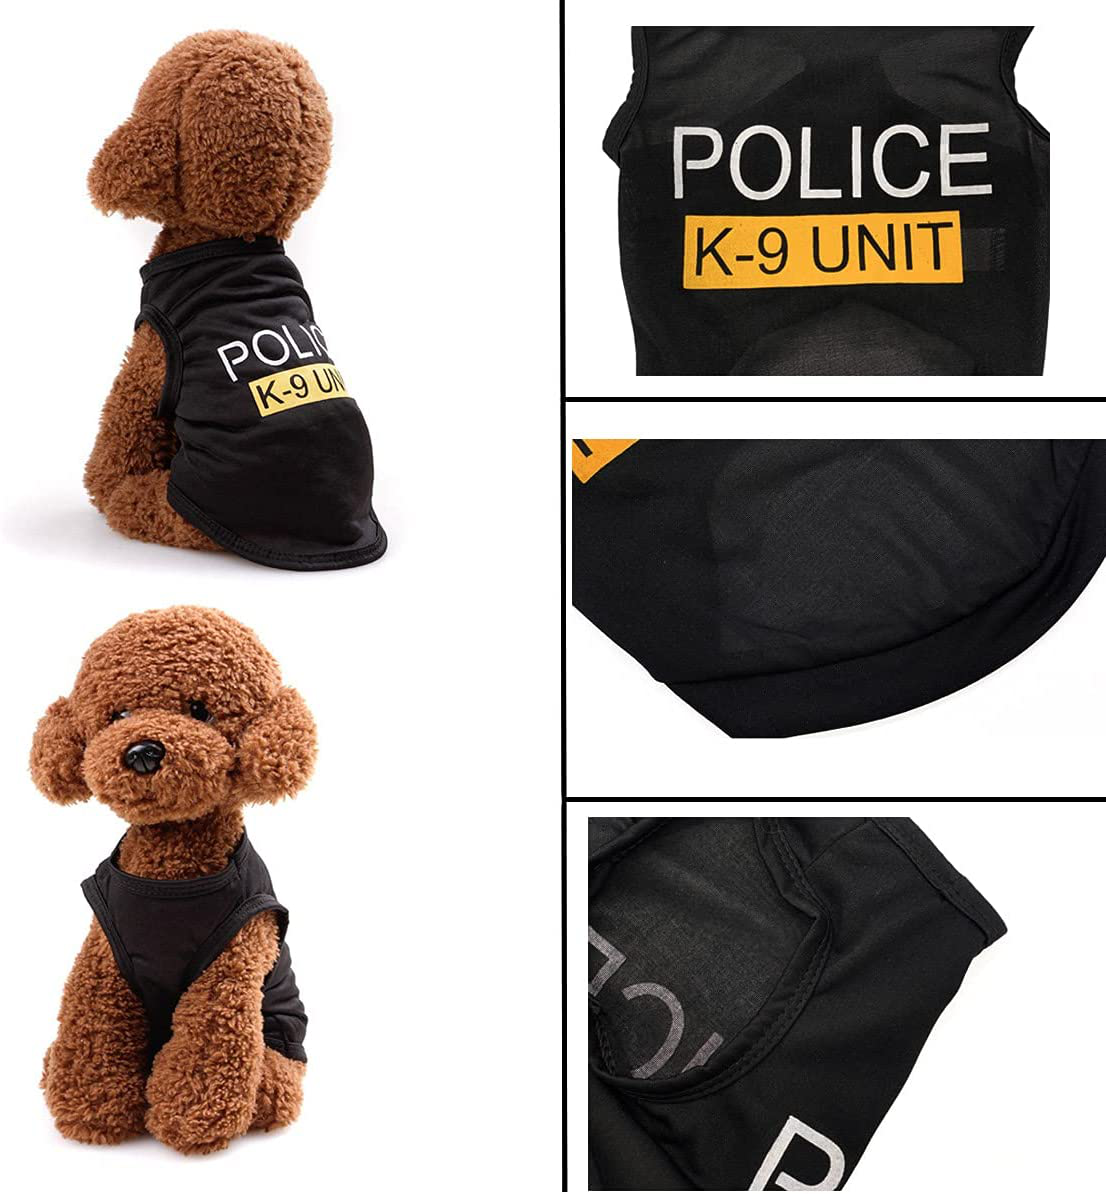 Dog T-Shirt Pet Police Dog Cat Clothes Summer Costumes Puppy Shirt, Breathable Outfits Vest Apparel for Extra Small Medium Doggy Boy and Girl